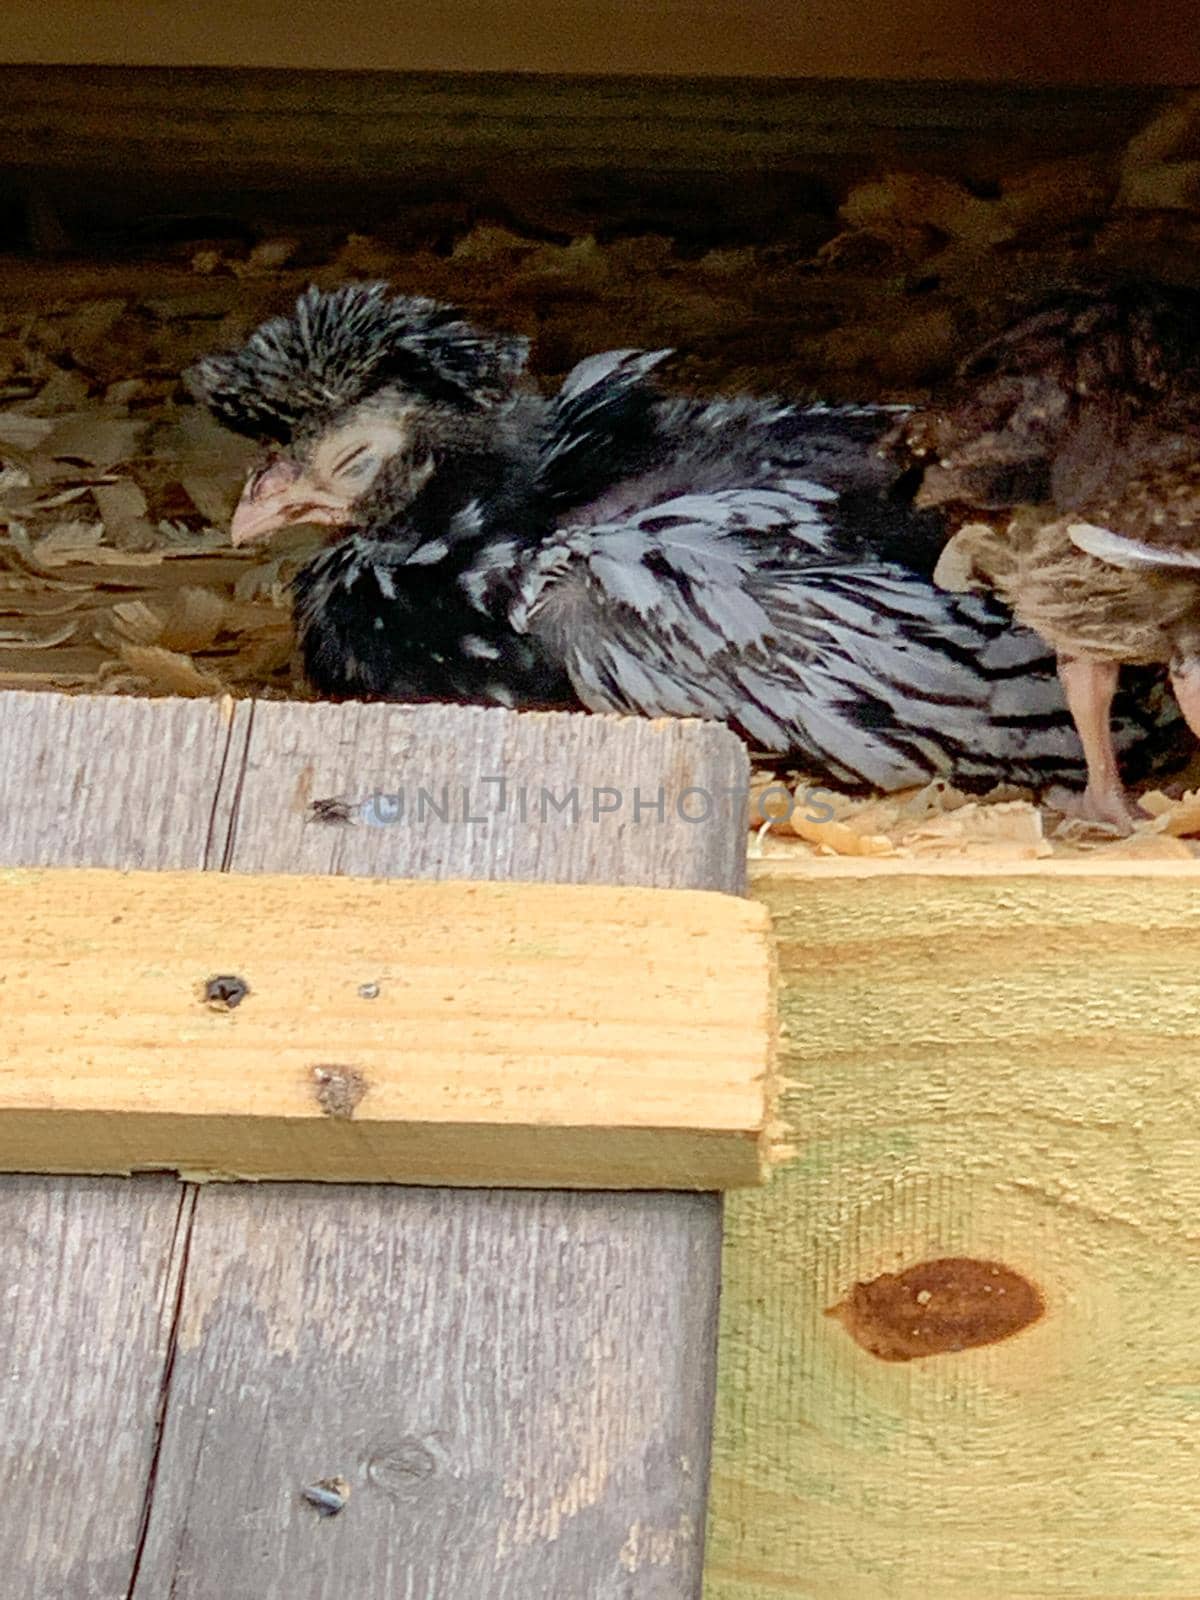 Young baby Polish Bantam rooster chick sleeping in the coop. High quality photo